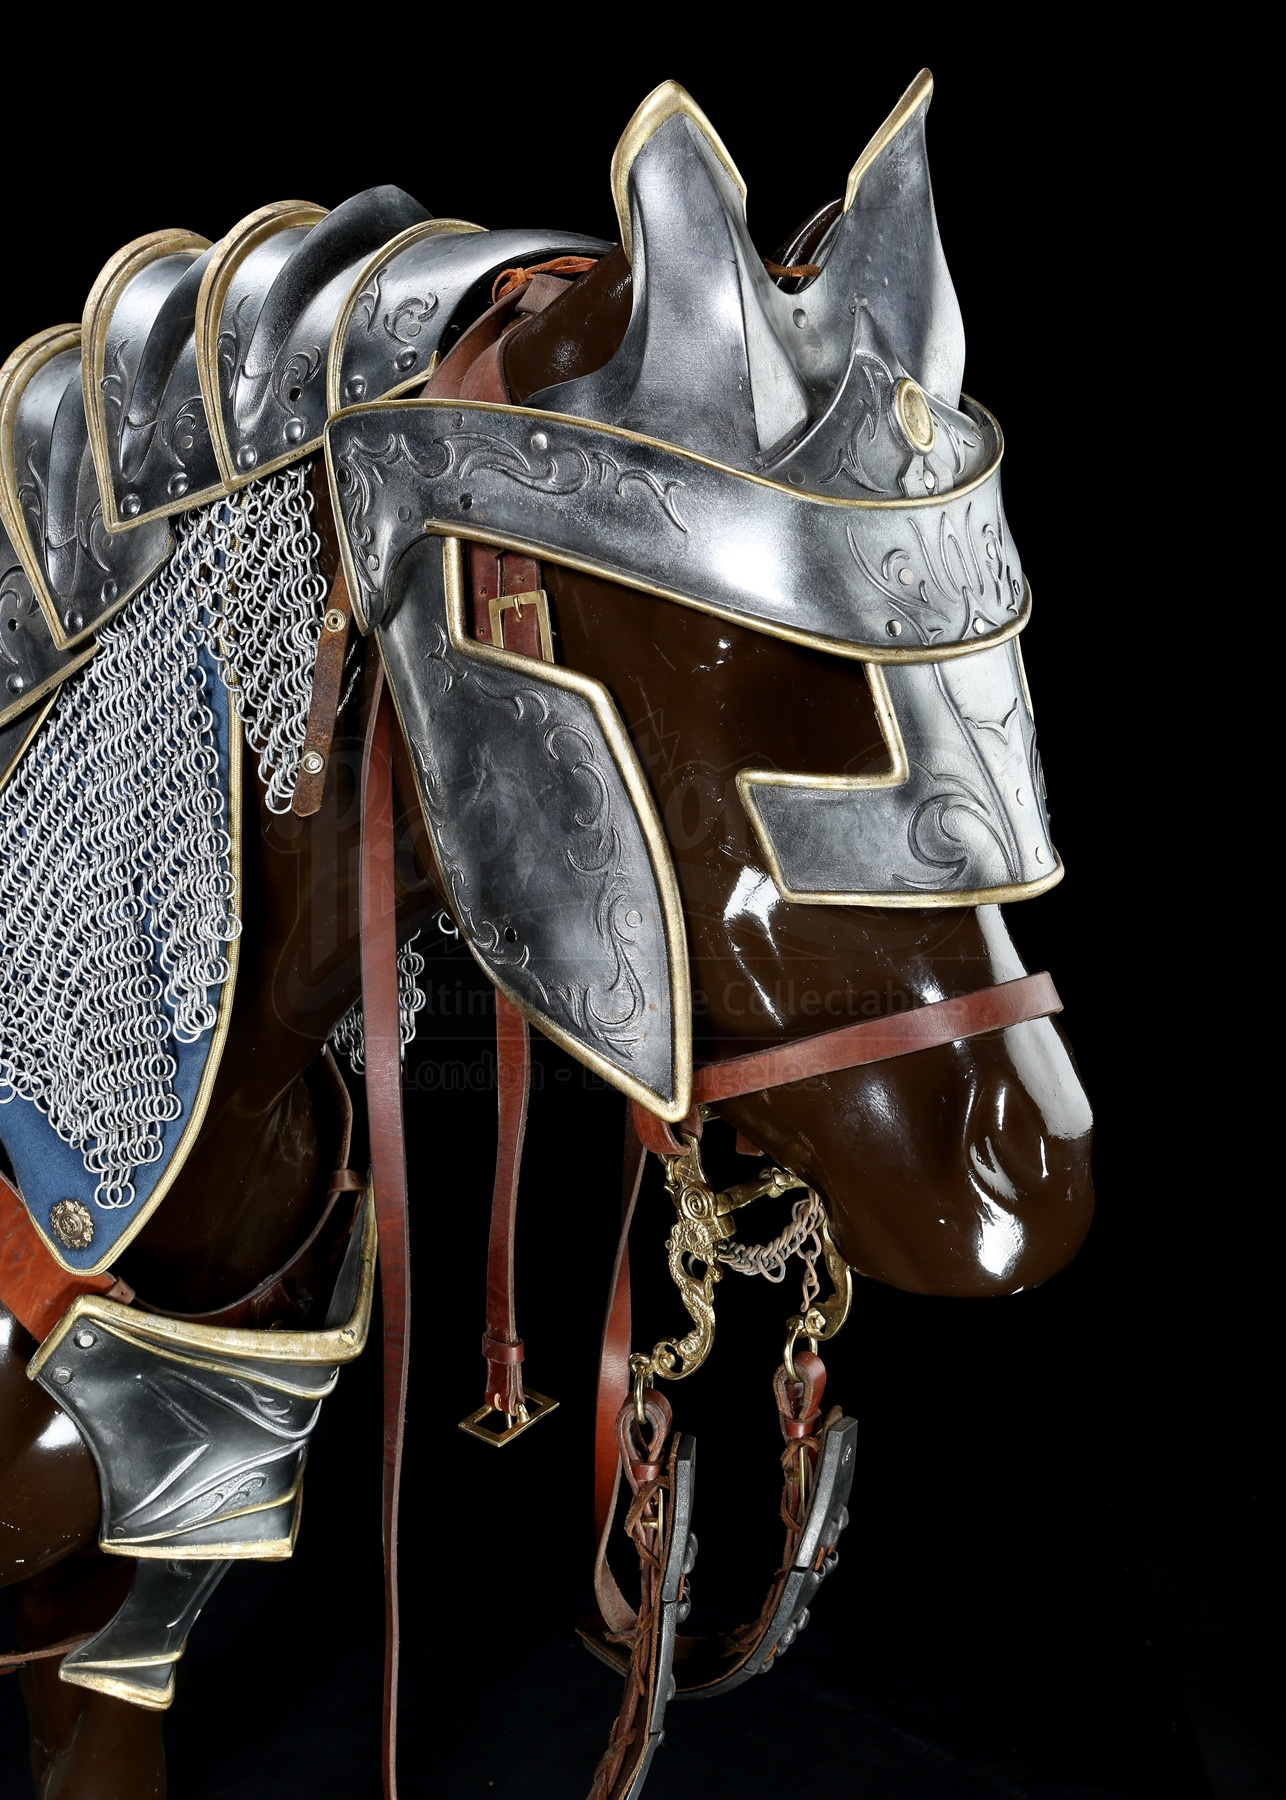 Alliance Knight Horse Armor - Current price: $1600